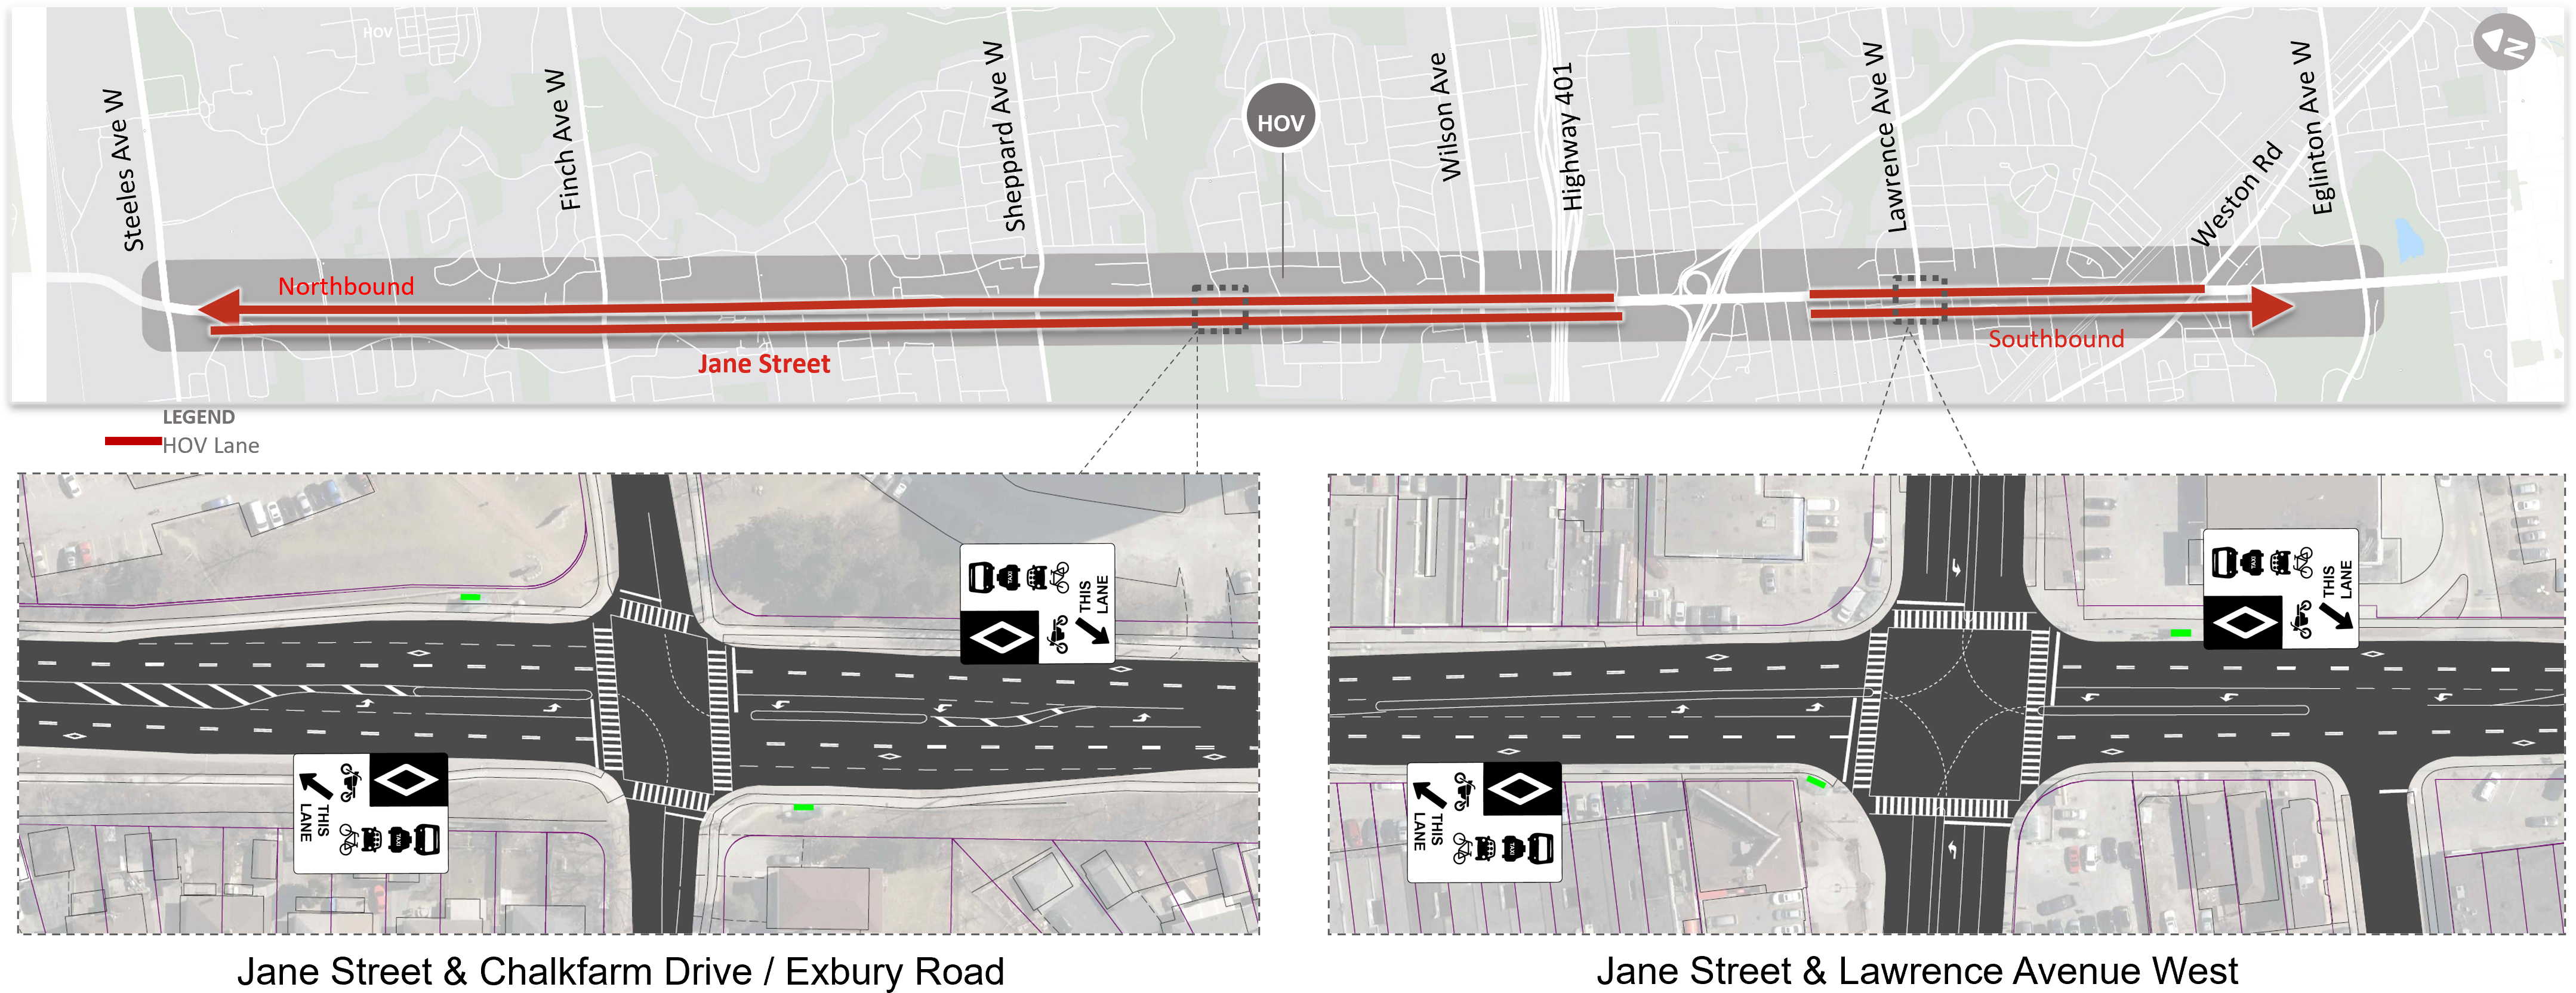 Conceptual map of the Jane Street showing mixed traffic curb lanes convert to continuous, priority lanes for High Occupancy Vehicles (HOV 3 plus), taxis, motorcycles and bicycles between Steeles Avenue West and Eglinton Avenue West, with a break near the Highway 400 ramps.